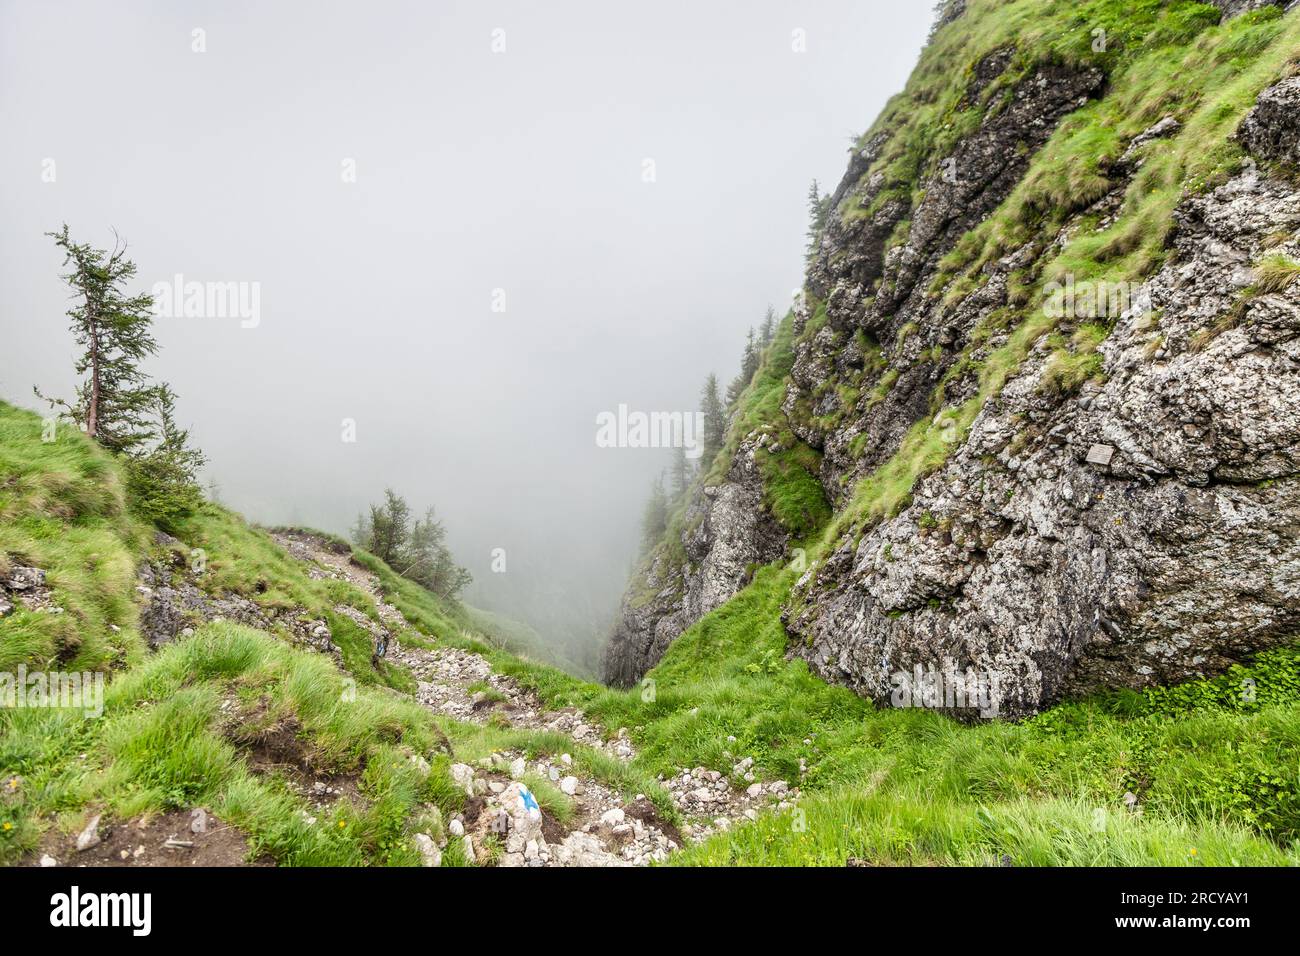 Mountains shrouded in clouds along the hiking path from Busteni to Caraiman Peak in the Carpathian Mountains, Romania. Stock Photo